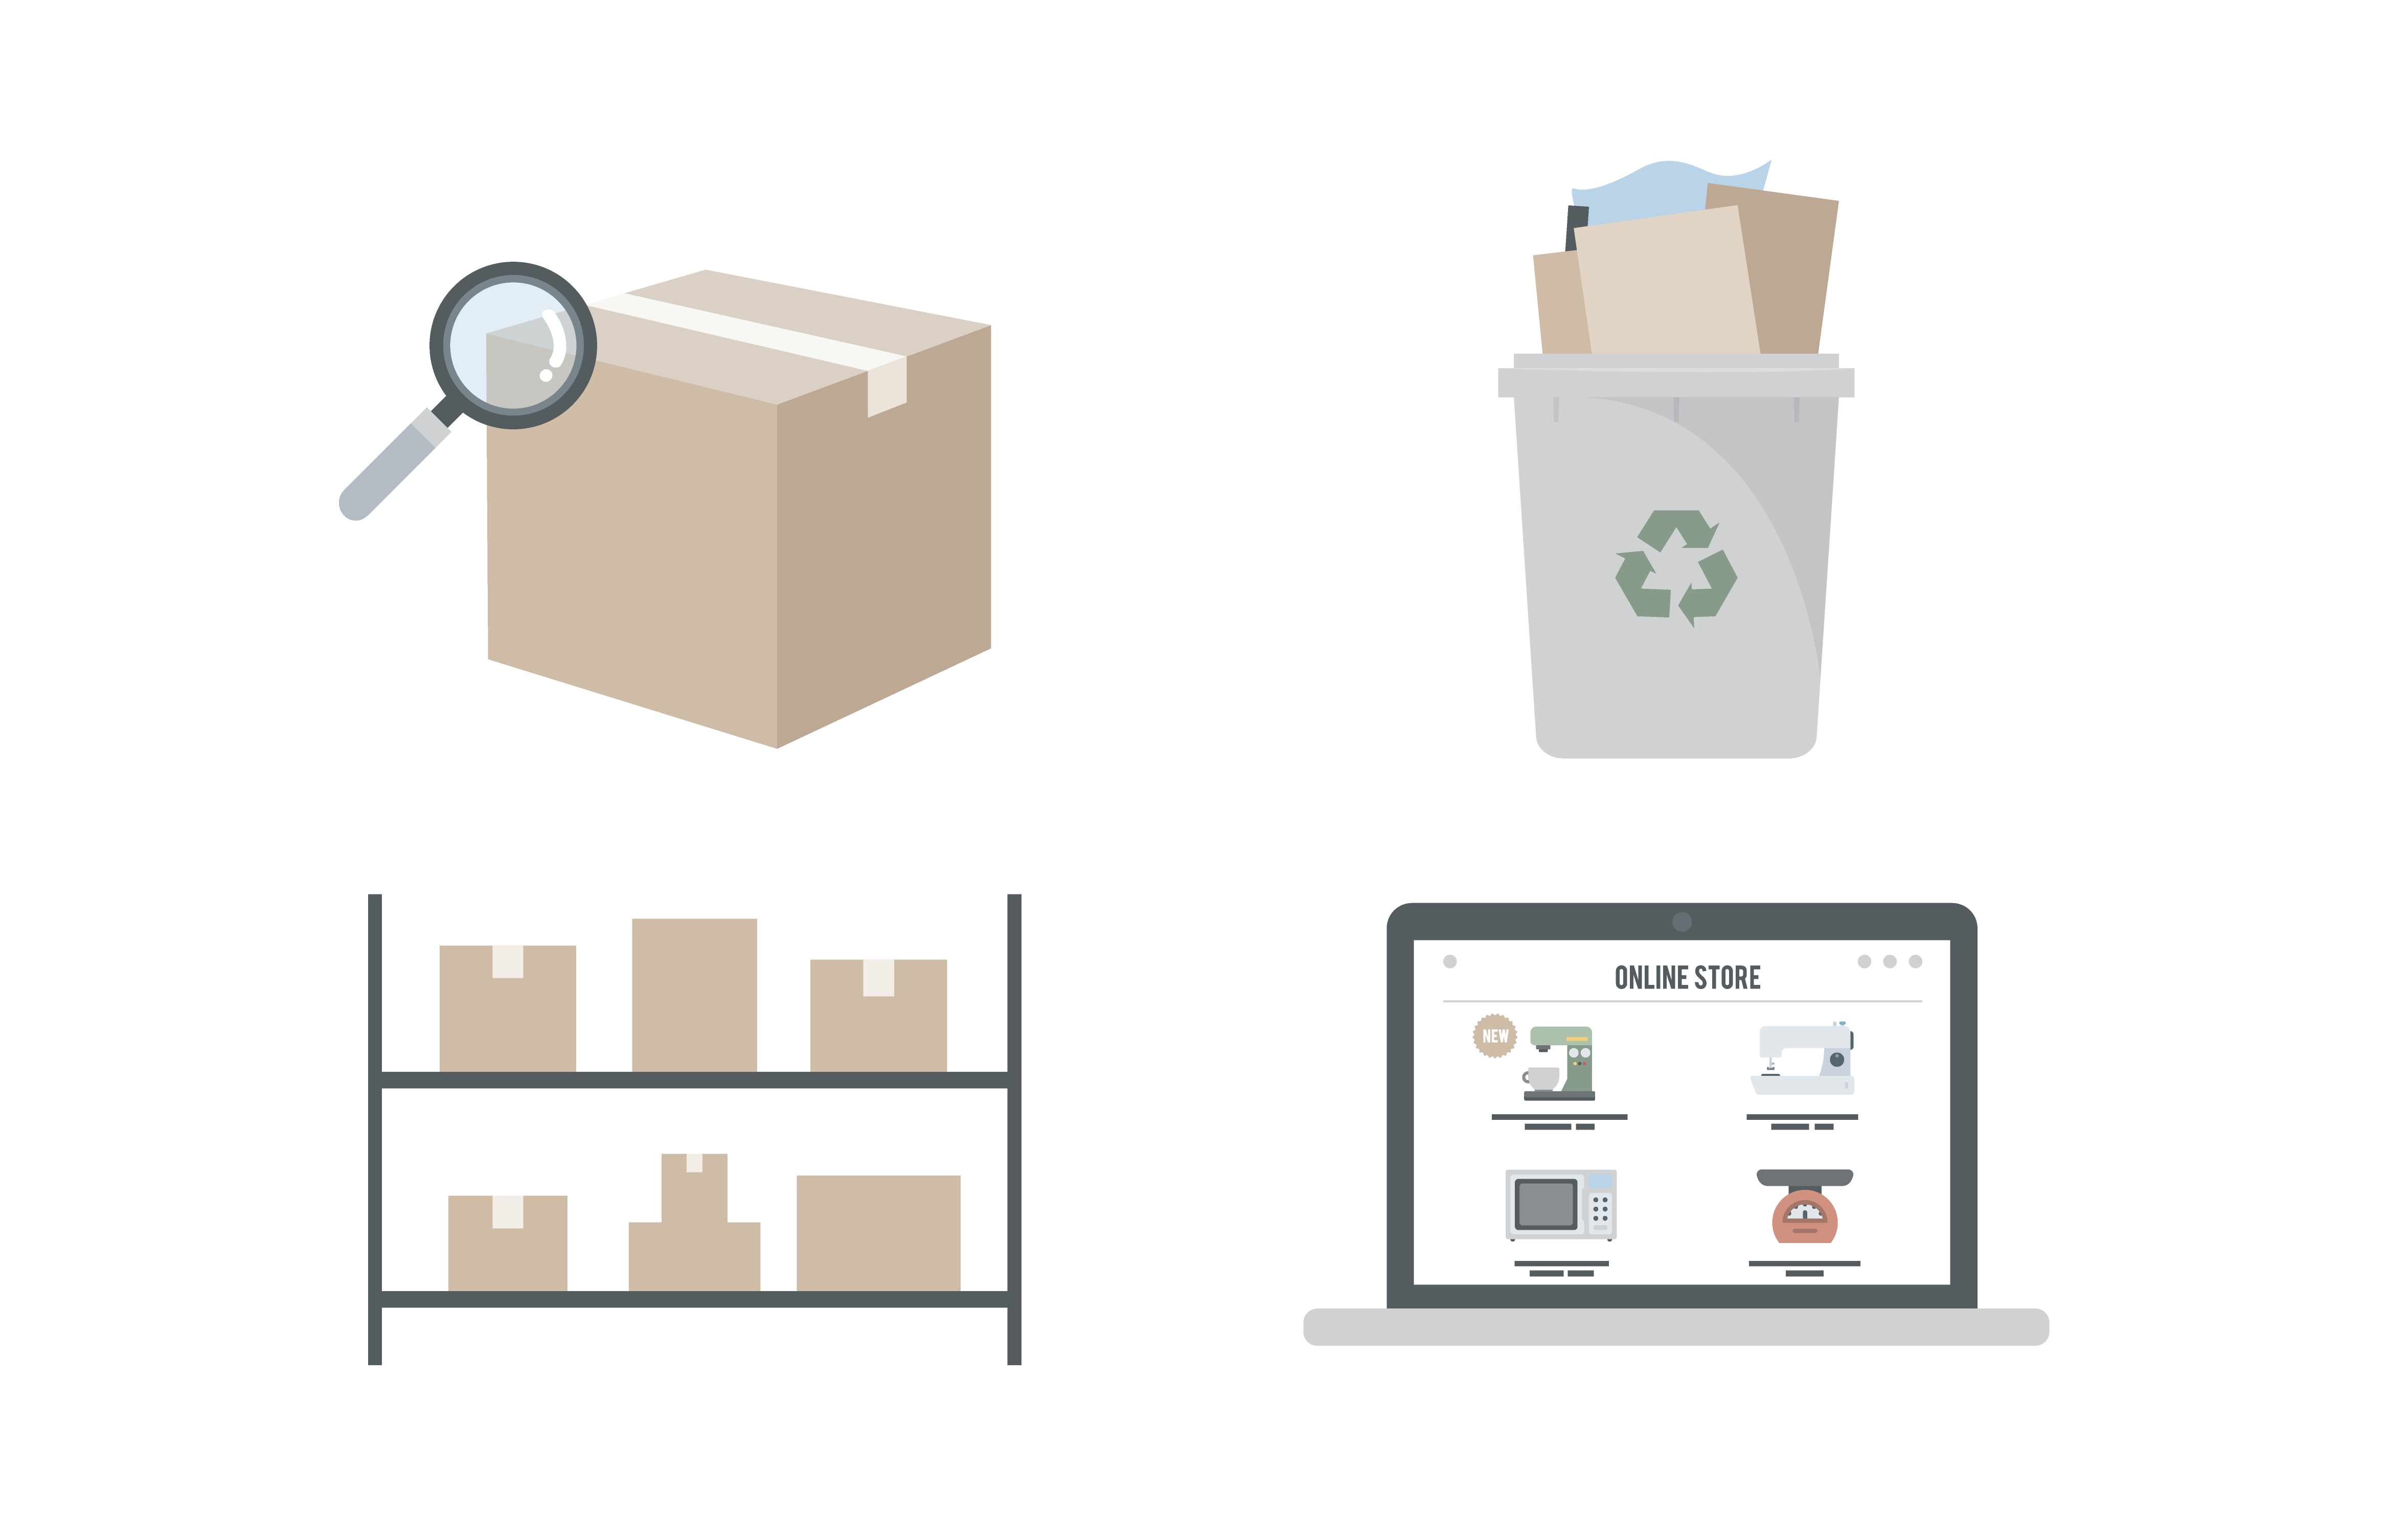 Box, recycling, stock shelves, and online shopping page illustrations.